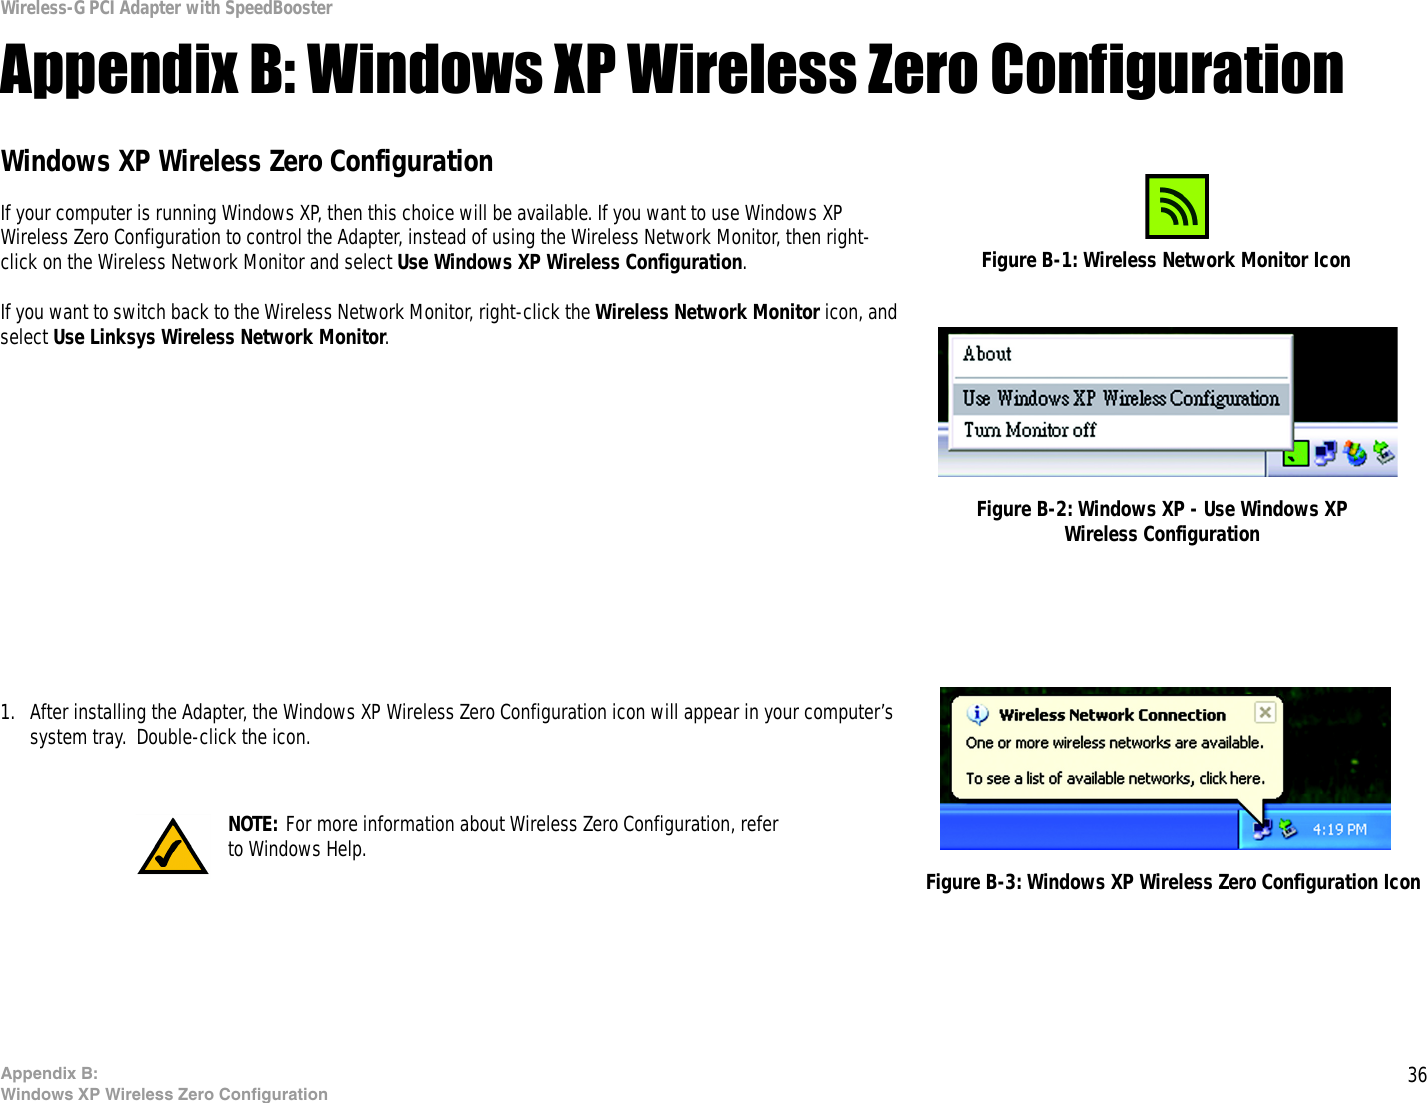 36Appendix B: Windows XP Wireless Zero ConfigurationWireless-G PCI Adapter with SpeedBoosterAppendix B: Windows XP Wireless Zero ConfigurationWindows XP Wireless Zero ConfigurationIf your computer is running Windows XP, then this choice will be available. If you want to use Windows XP Wireless Zero Configuration to control the Adapter, instead of using the Wireless Network Monitor, then right-click on the Wireless Network Monitor and select Use Windows XP Wireless Configuration. If you want to switch back to the Wireless Network Monitor, right-click the Wireless Network Monitor icon, and select Use Linksys Wireless Network Monitor.1. After installing the Adapter, the Windows XP Wireless Zero Configuration icon will appear in your computer’s system tray.  Double-click the icon.  Figure B-1: Wireless Network Monitor IconFigure B-2: Windows XP - Use Windows XP Wireless ConfigurationNOTE: For more information about Wireless Zero Configuration, refer to Windows Help. Figure B-3: Windows XP Wireless Zero Configuration Icon